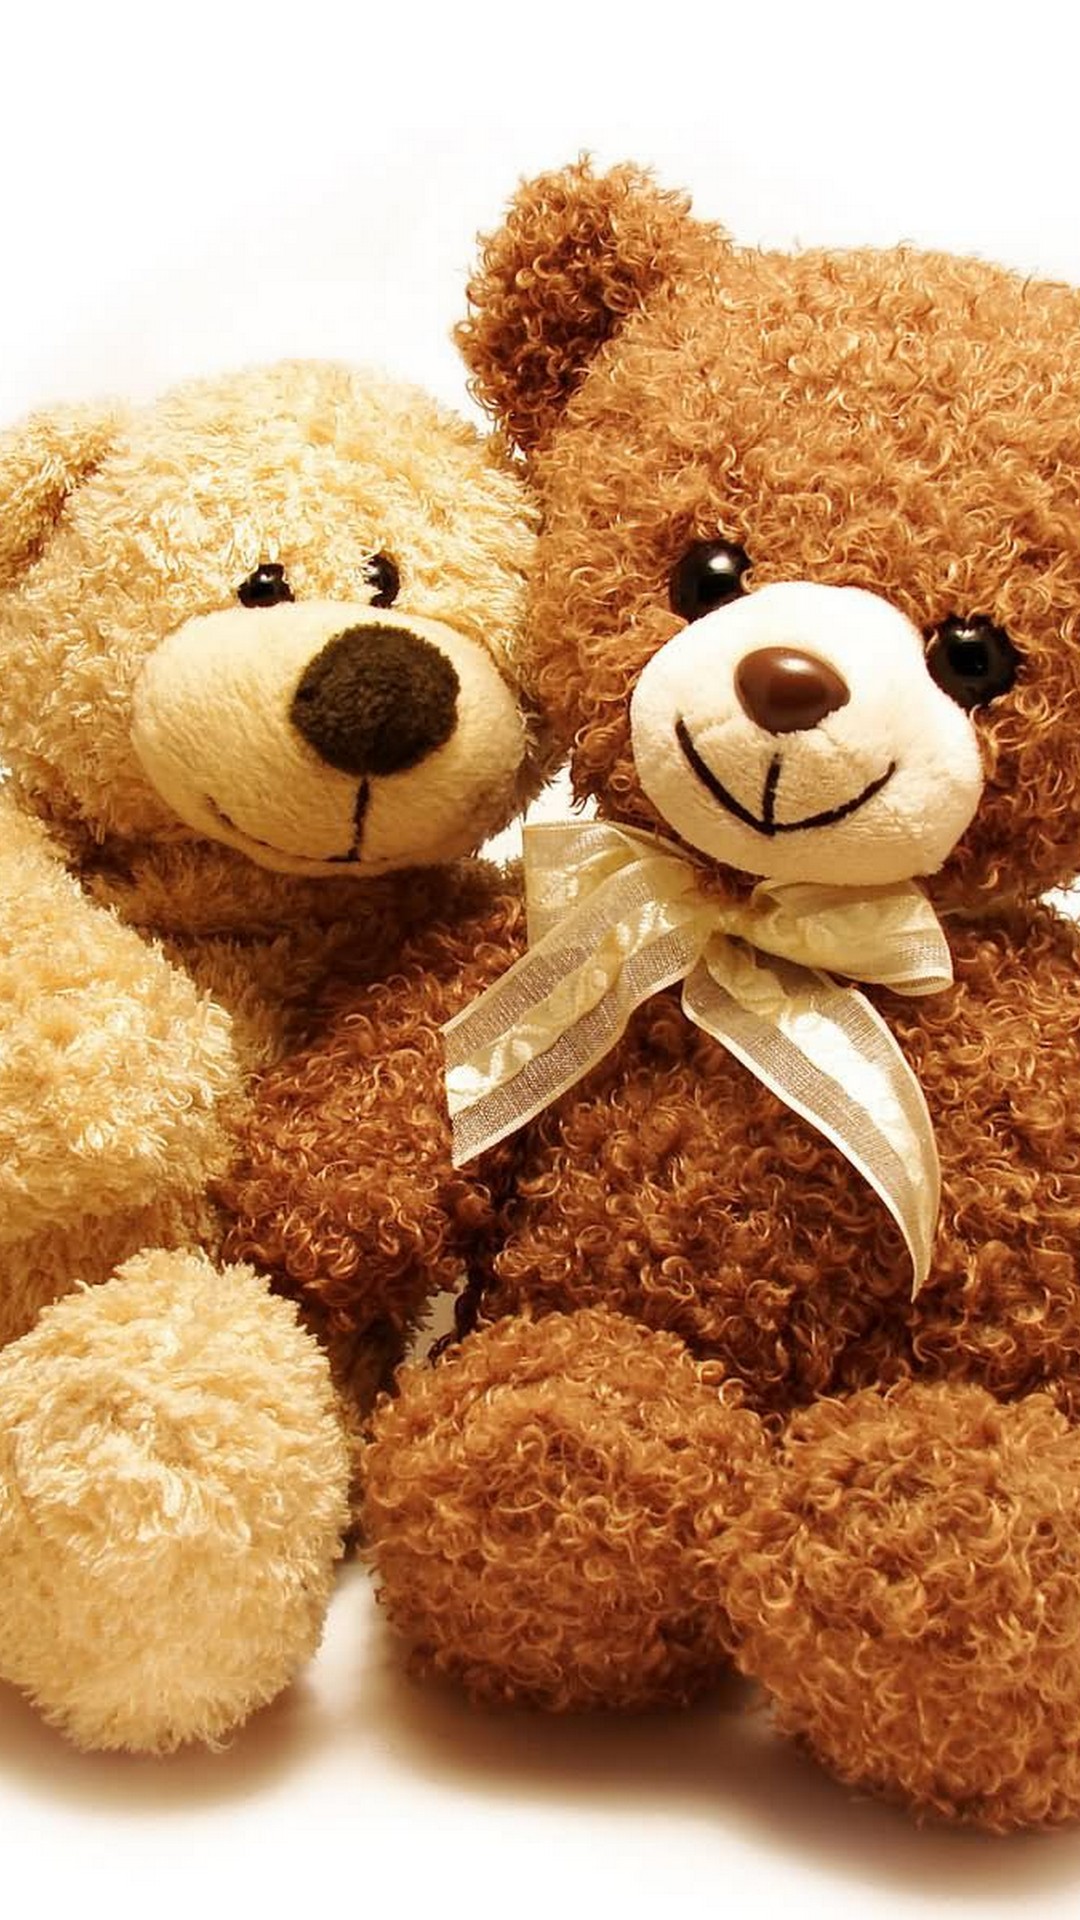 Teddy Bear Giant Android Wallpaper with resolution 1080X1920 pixel. You can make this wallpaper for your Android backgrounds, Tablet, Smartphones Screensavers and Mobile Phone Lock Screen